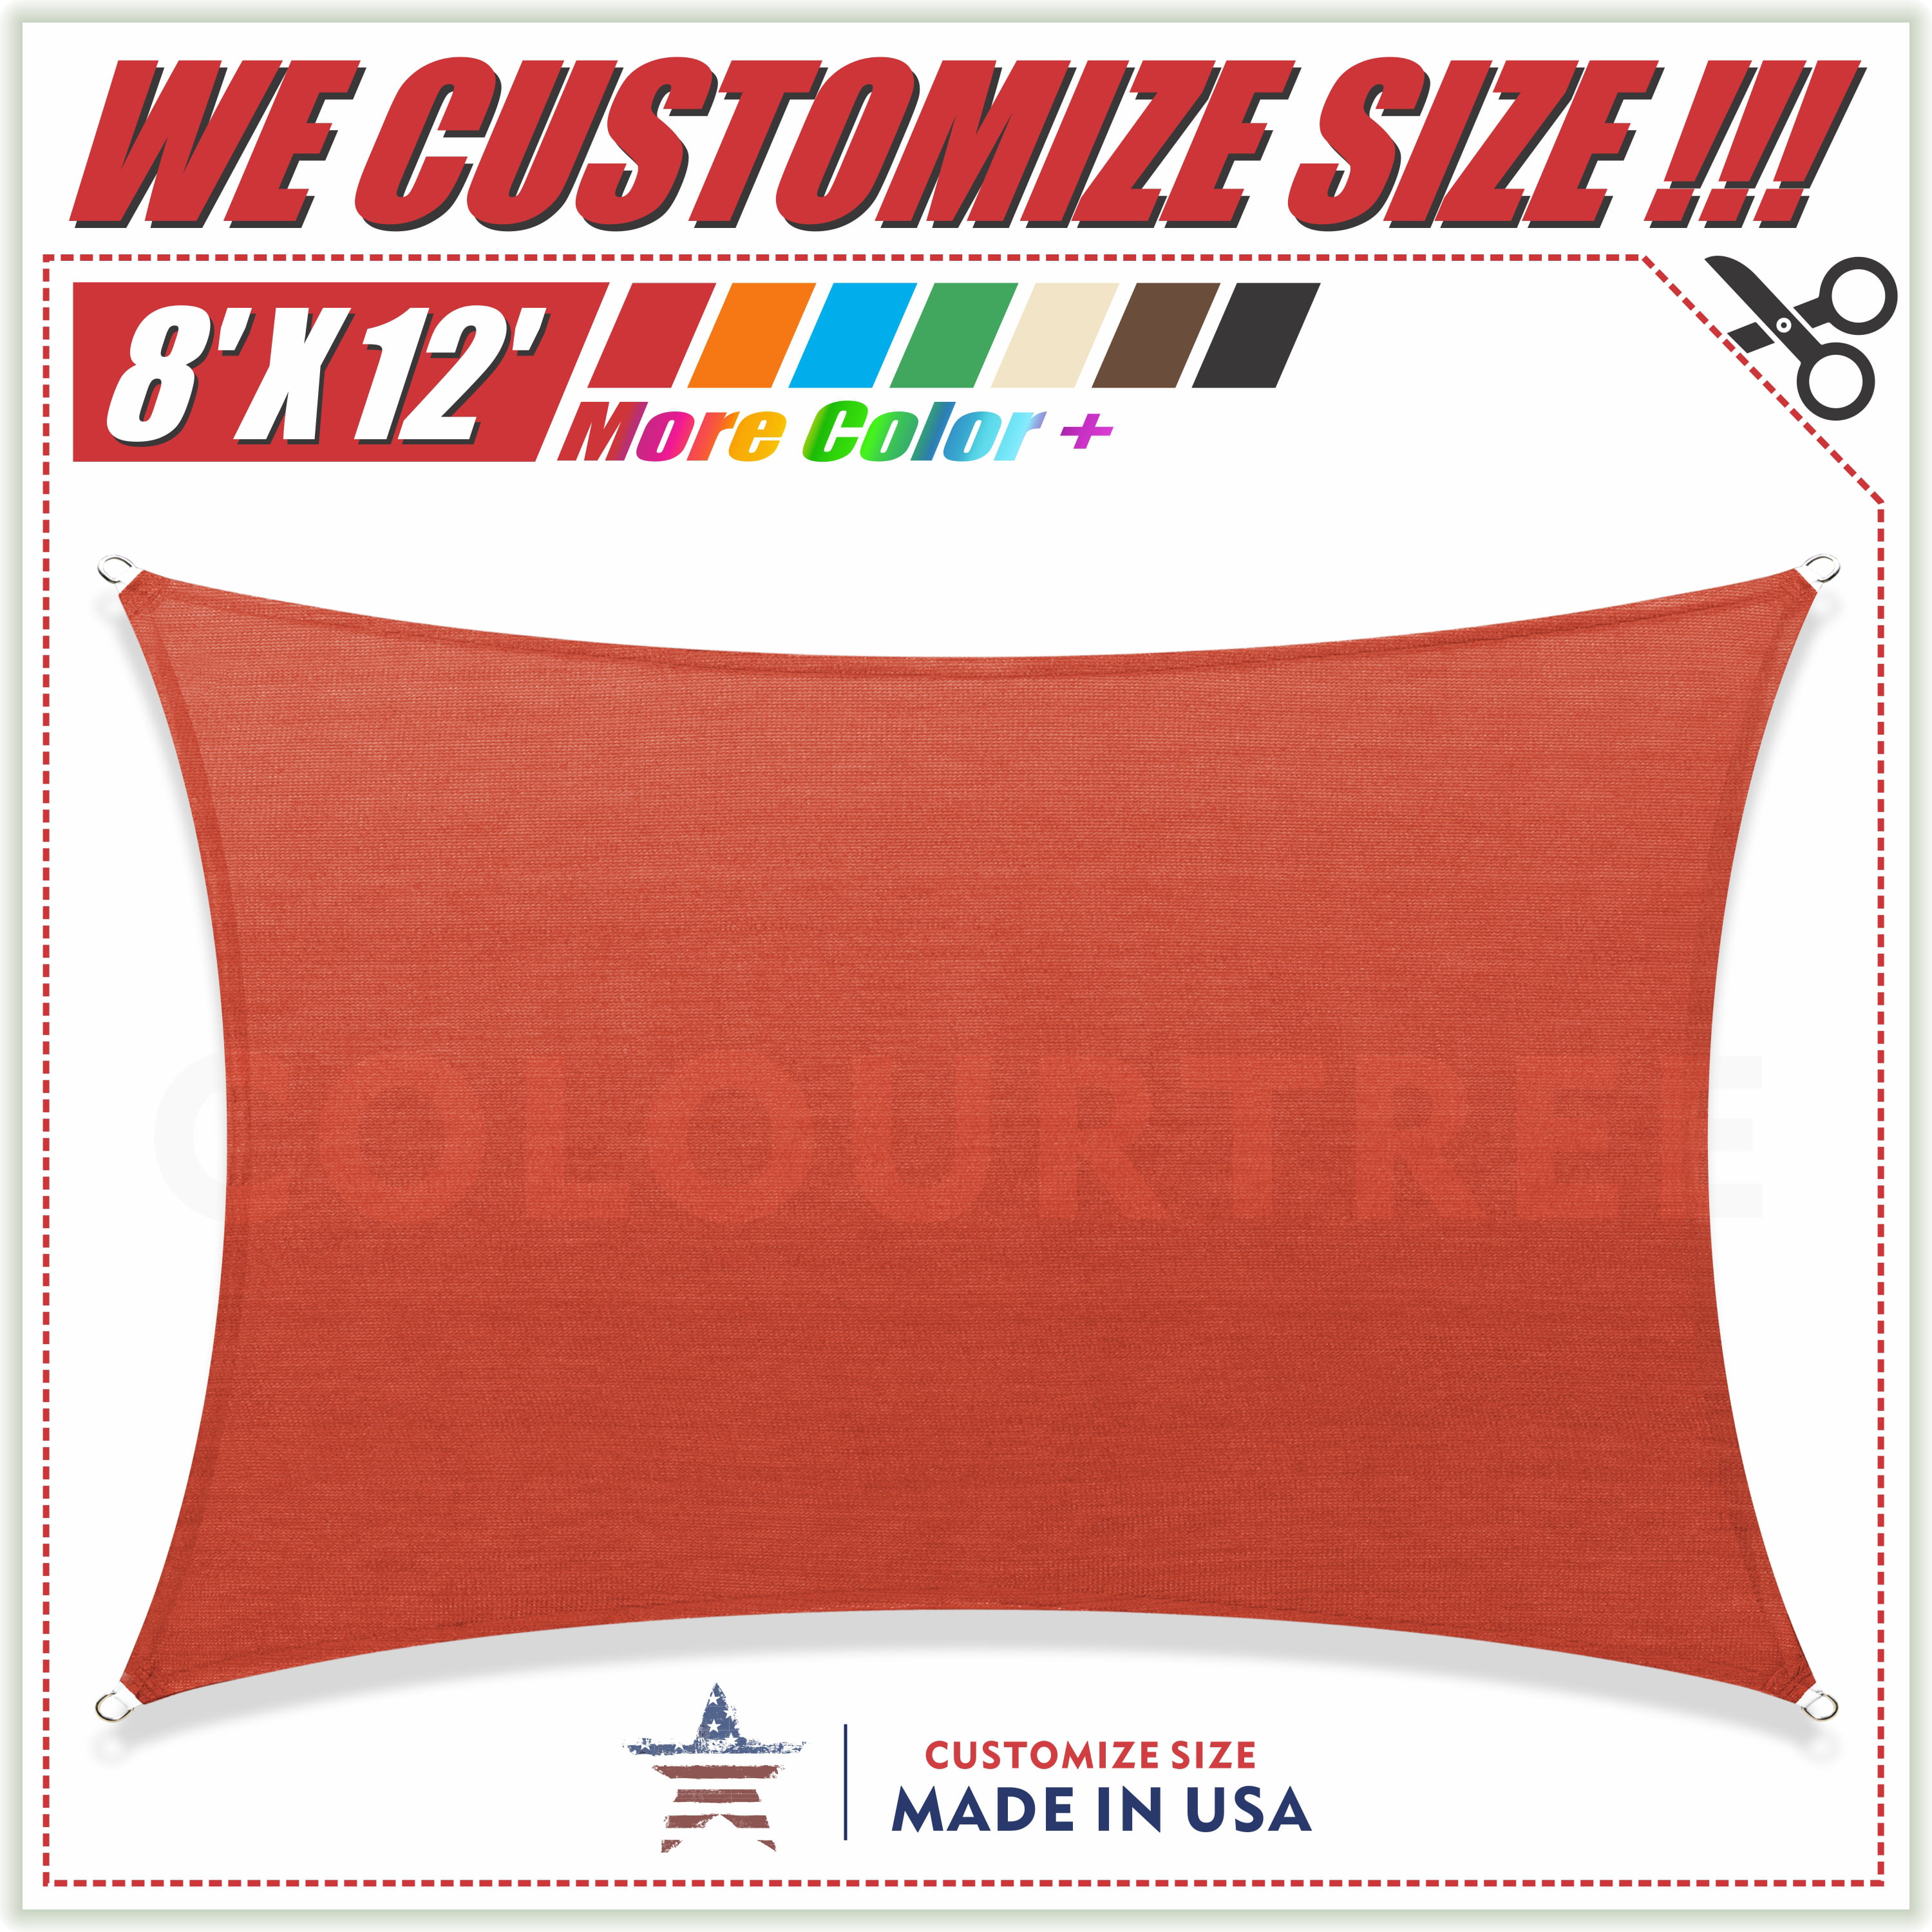 ColourTree 8' x 12' Red Rectangle Sun Shade Sail Canopy - Commercial  Standard Heavy Duty - 190 GSM - 3 Years Warranty